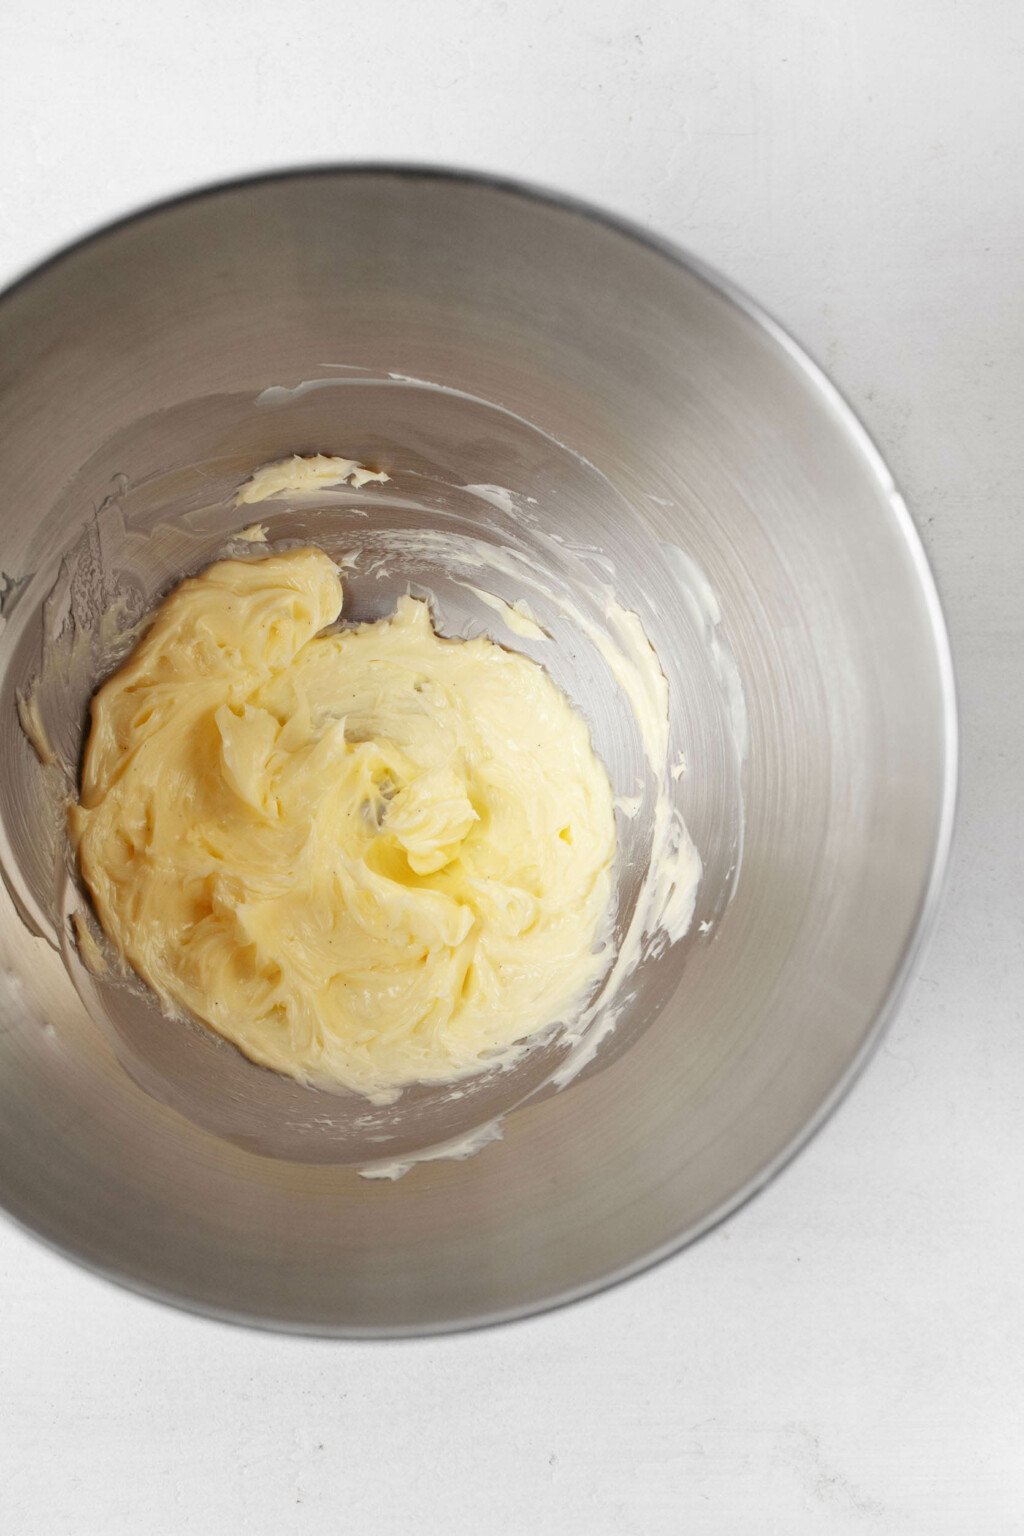 Beaten butter is resting in the silver bowl of a stand mixer.